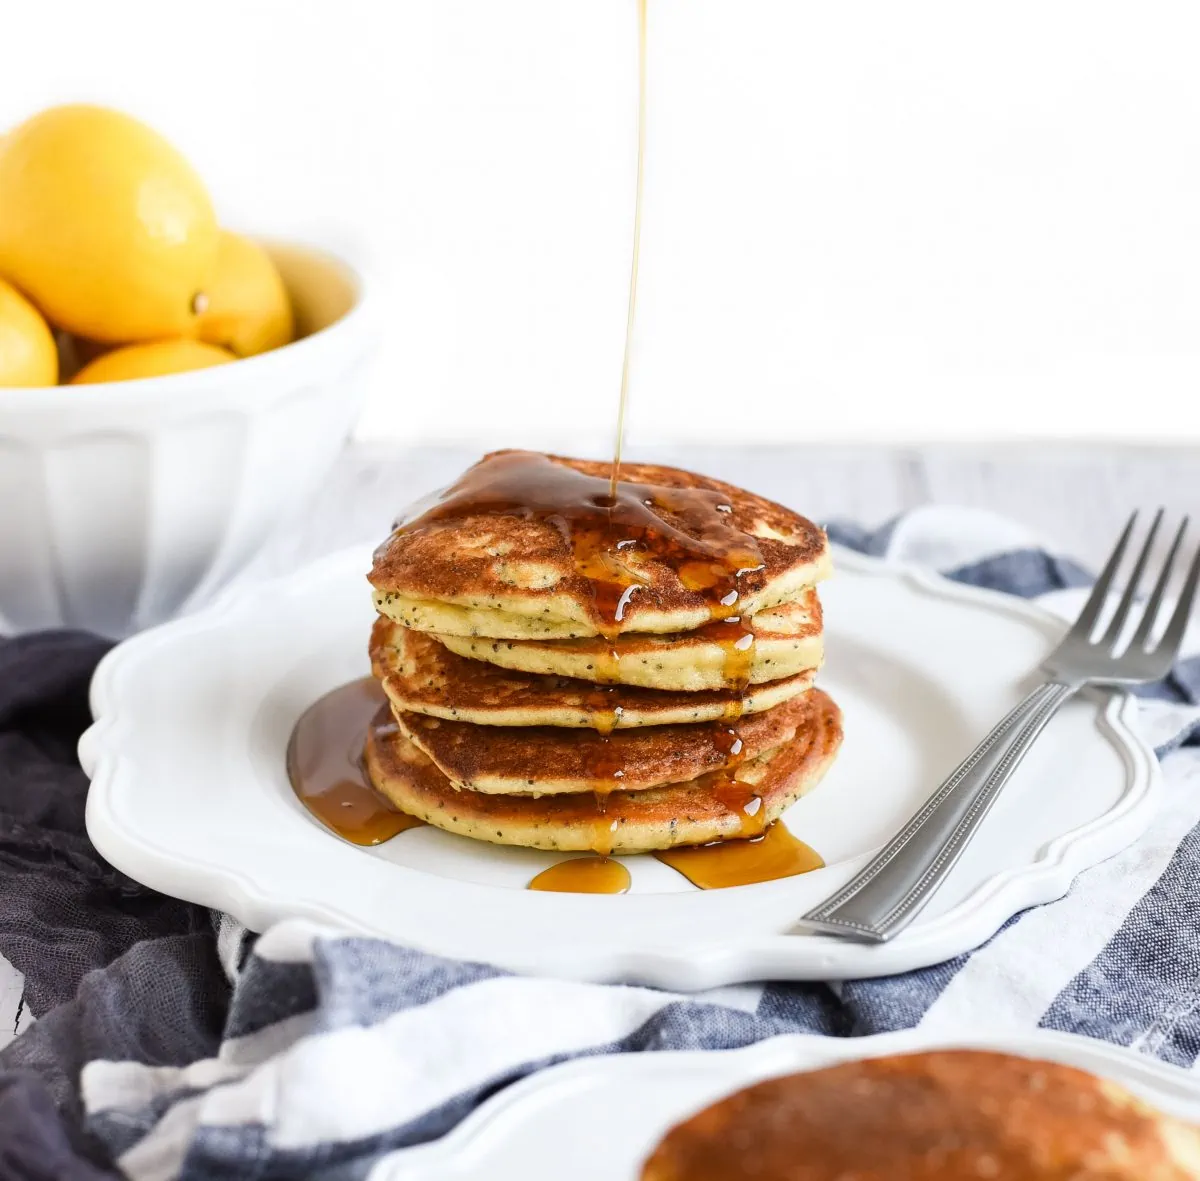  syrup drizzled over Lemon poppy seed pancakes photo